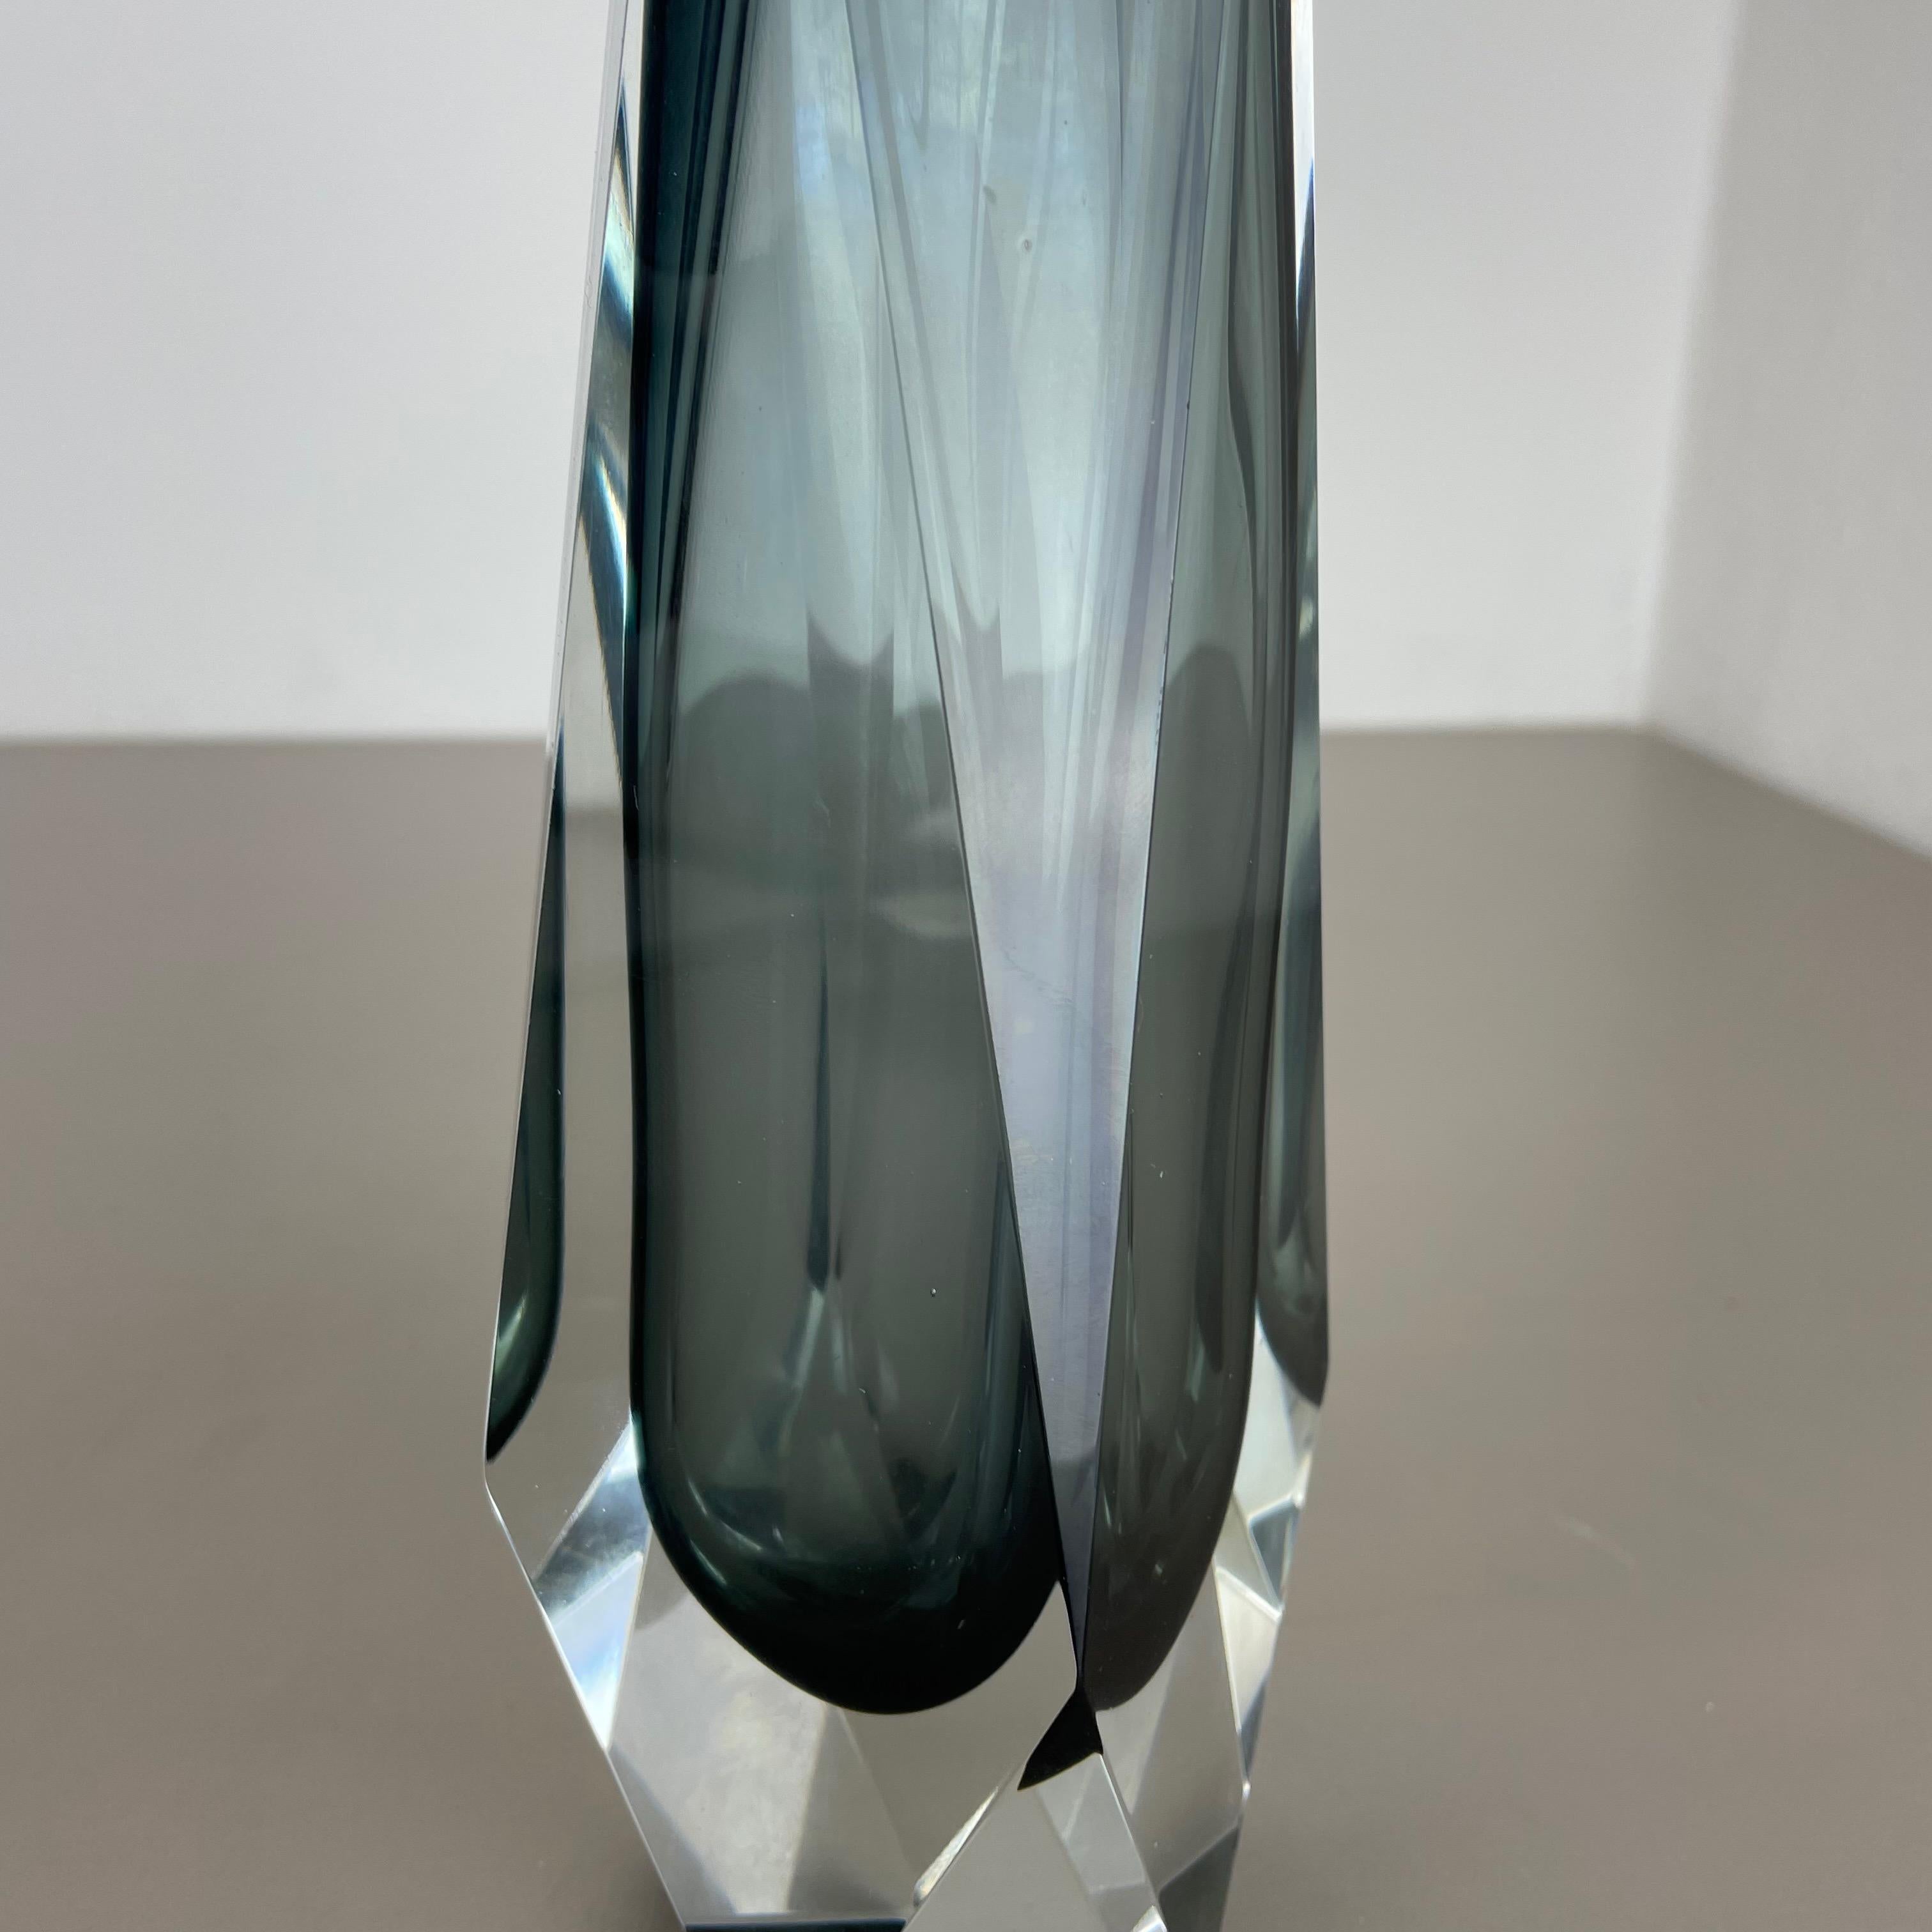 Large 25cm Grey Murano Glass Sommerso Vase by Flavio Poli Attributed, Italy 1970 For Sale 7